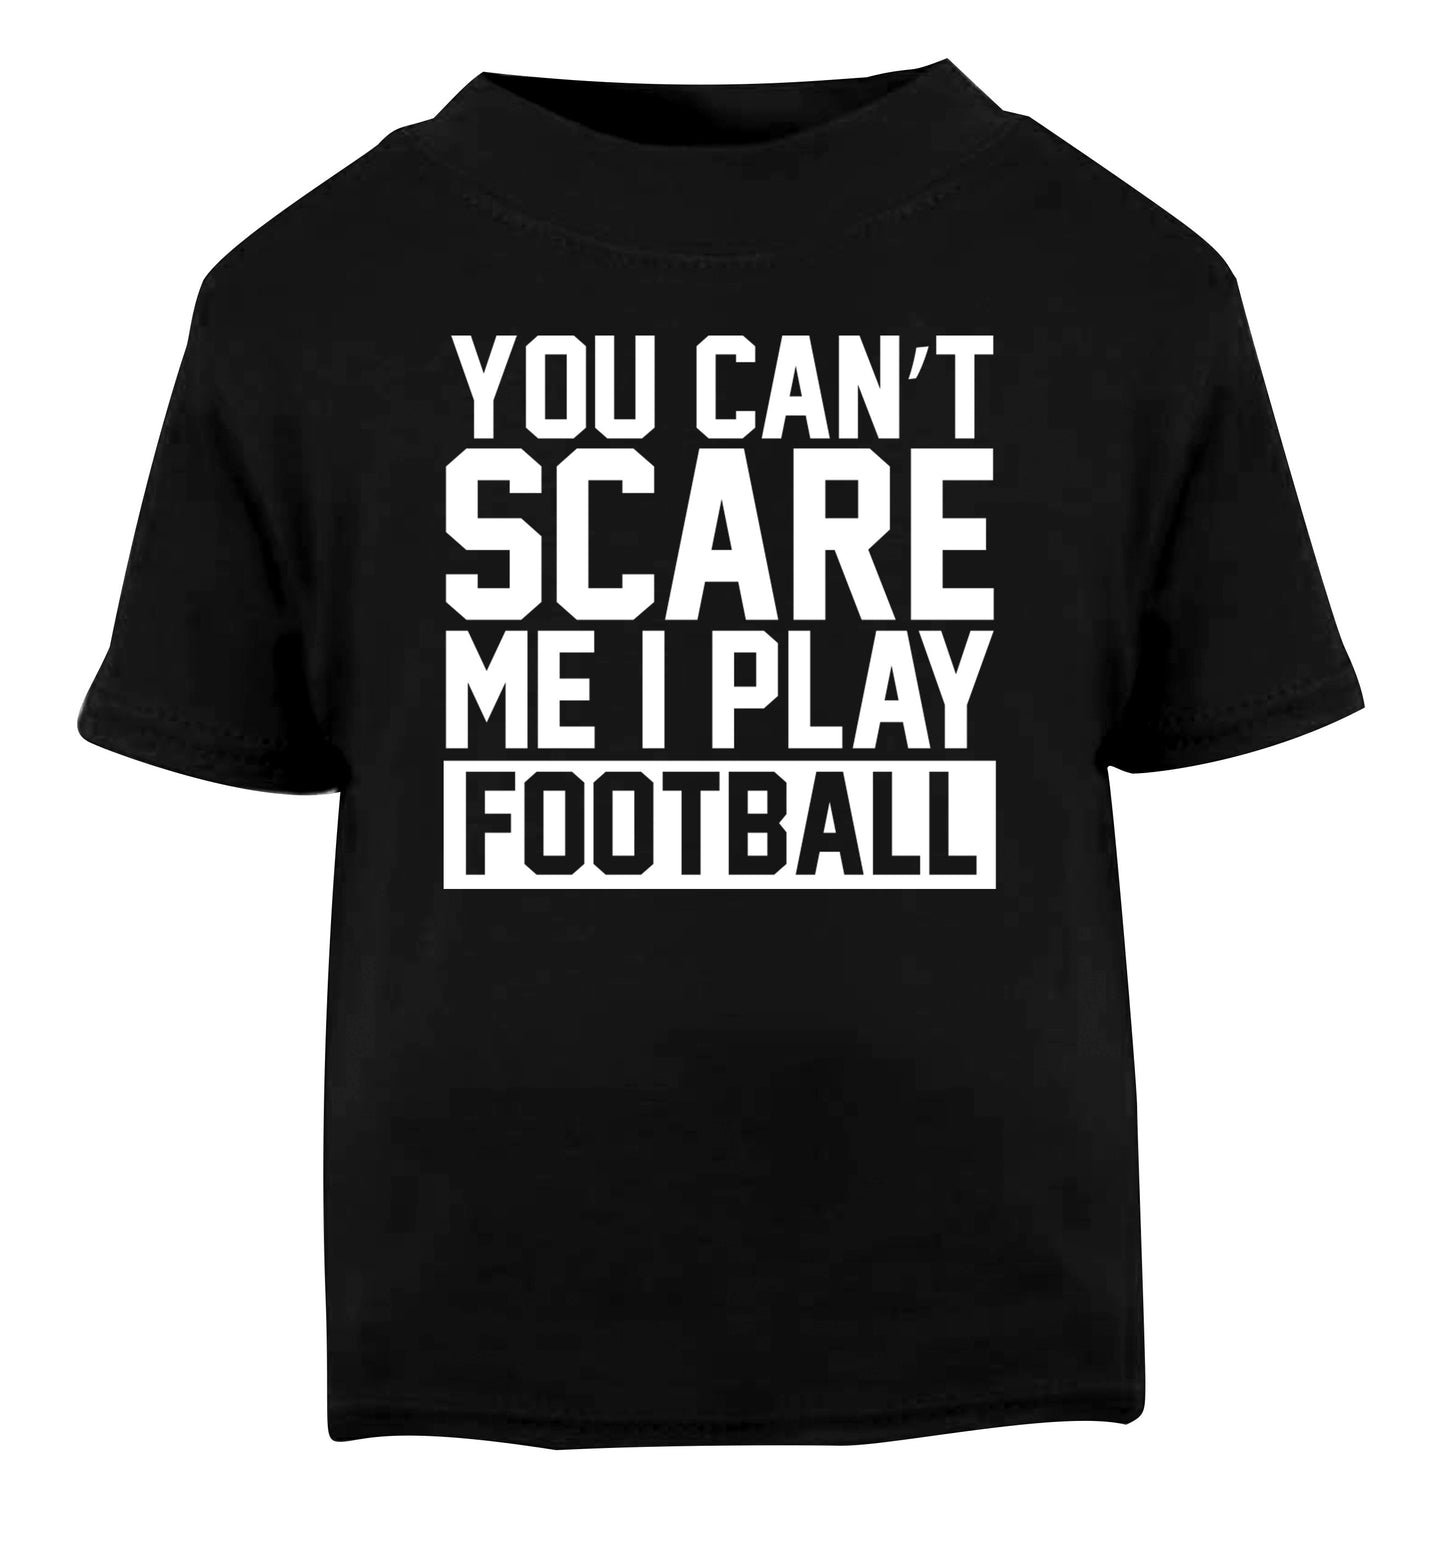 You can't scare me I play football Black Baby Toddler Tshirt 2 years